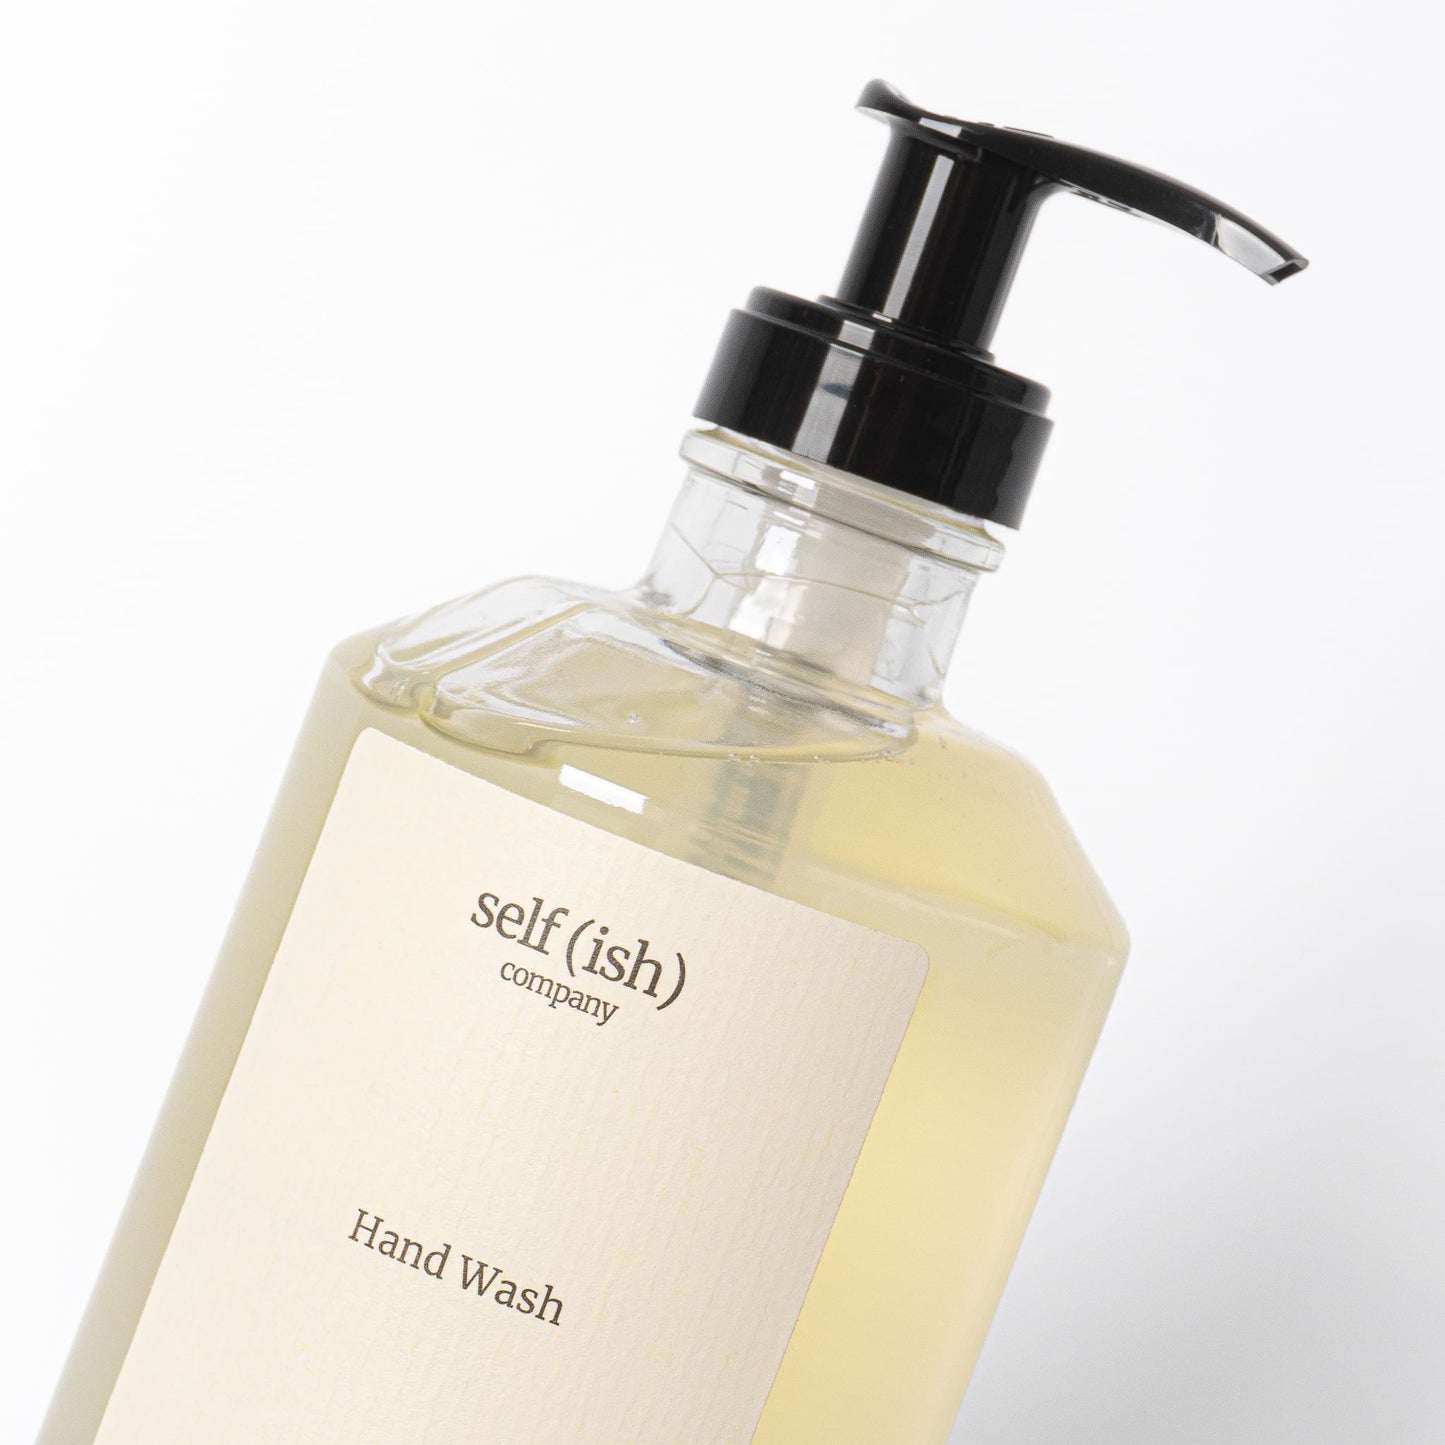 hand soap close-up with a heavy-duty glass bottle and black plastic pump, scented with lavender cypress and lemongrass essential oils and enhanced with natural hemp oil